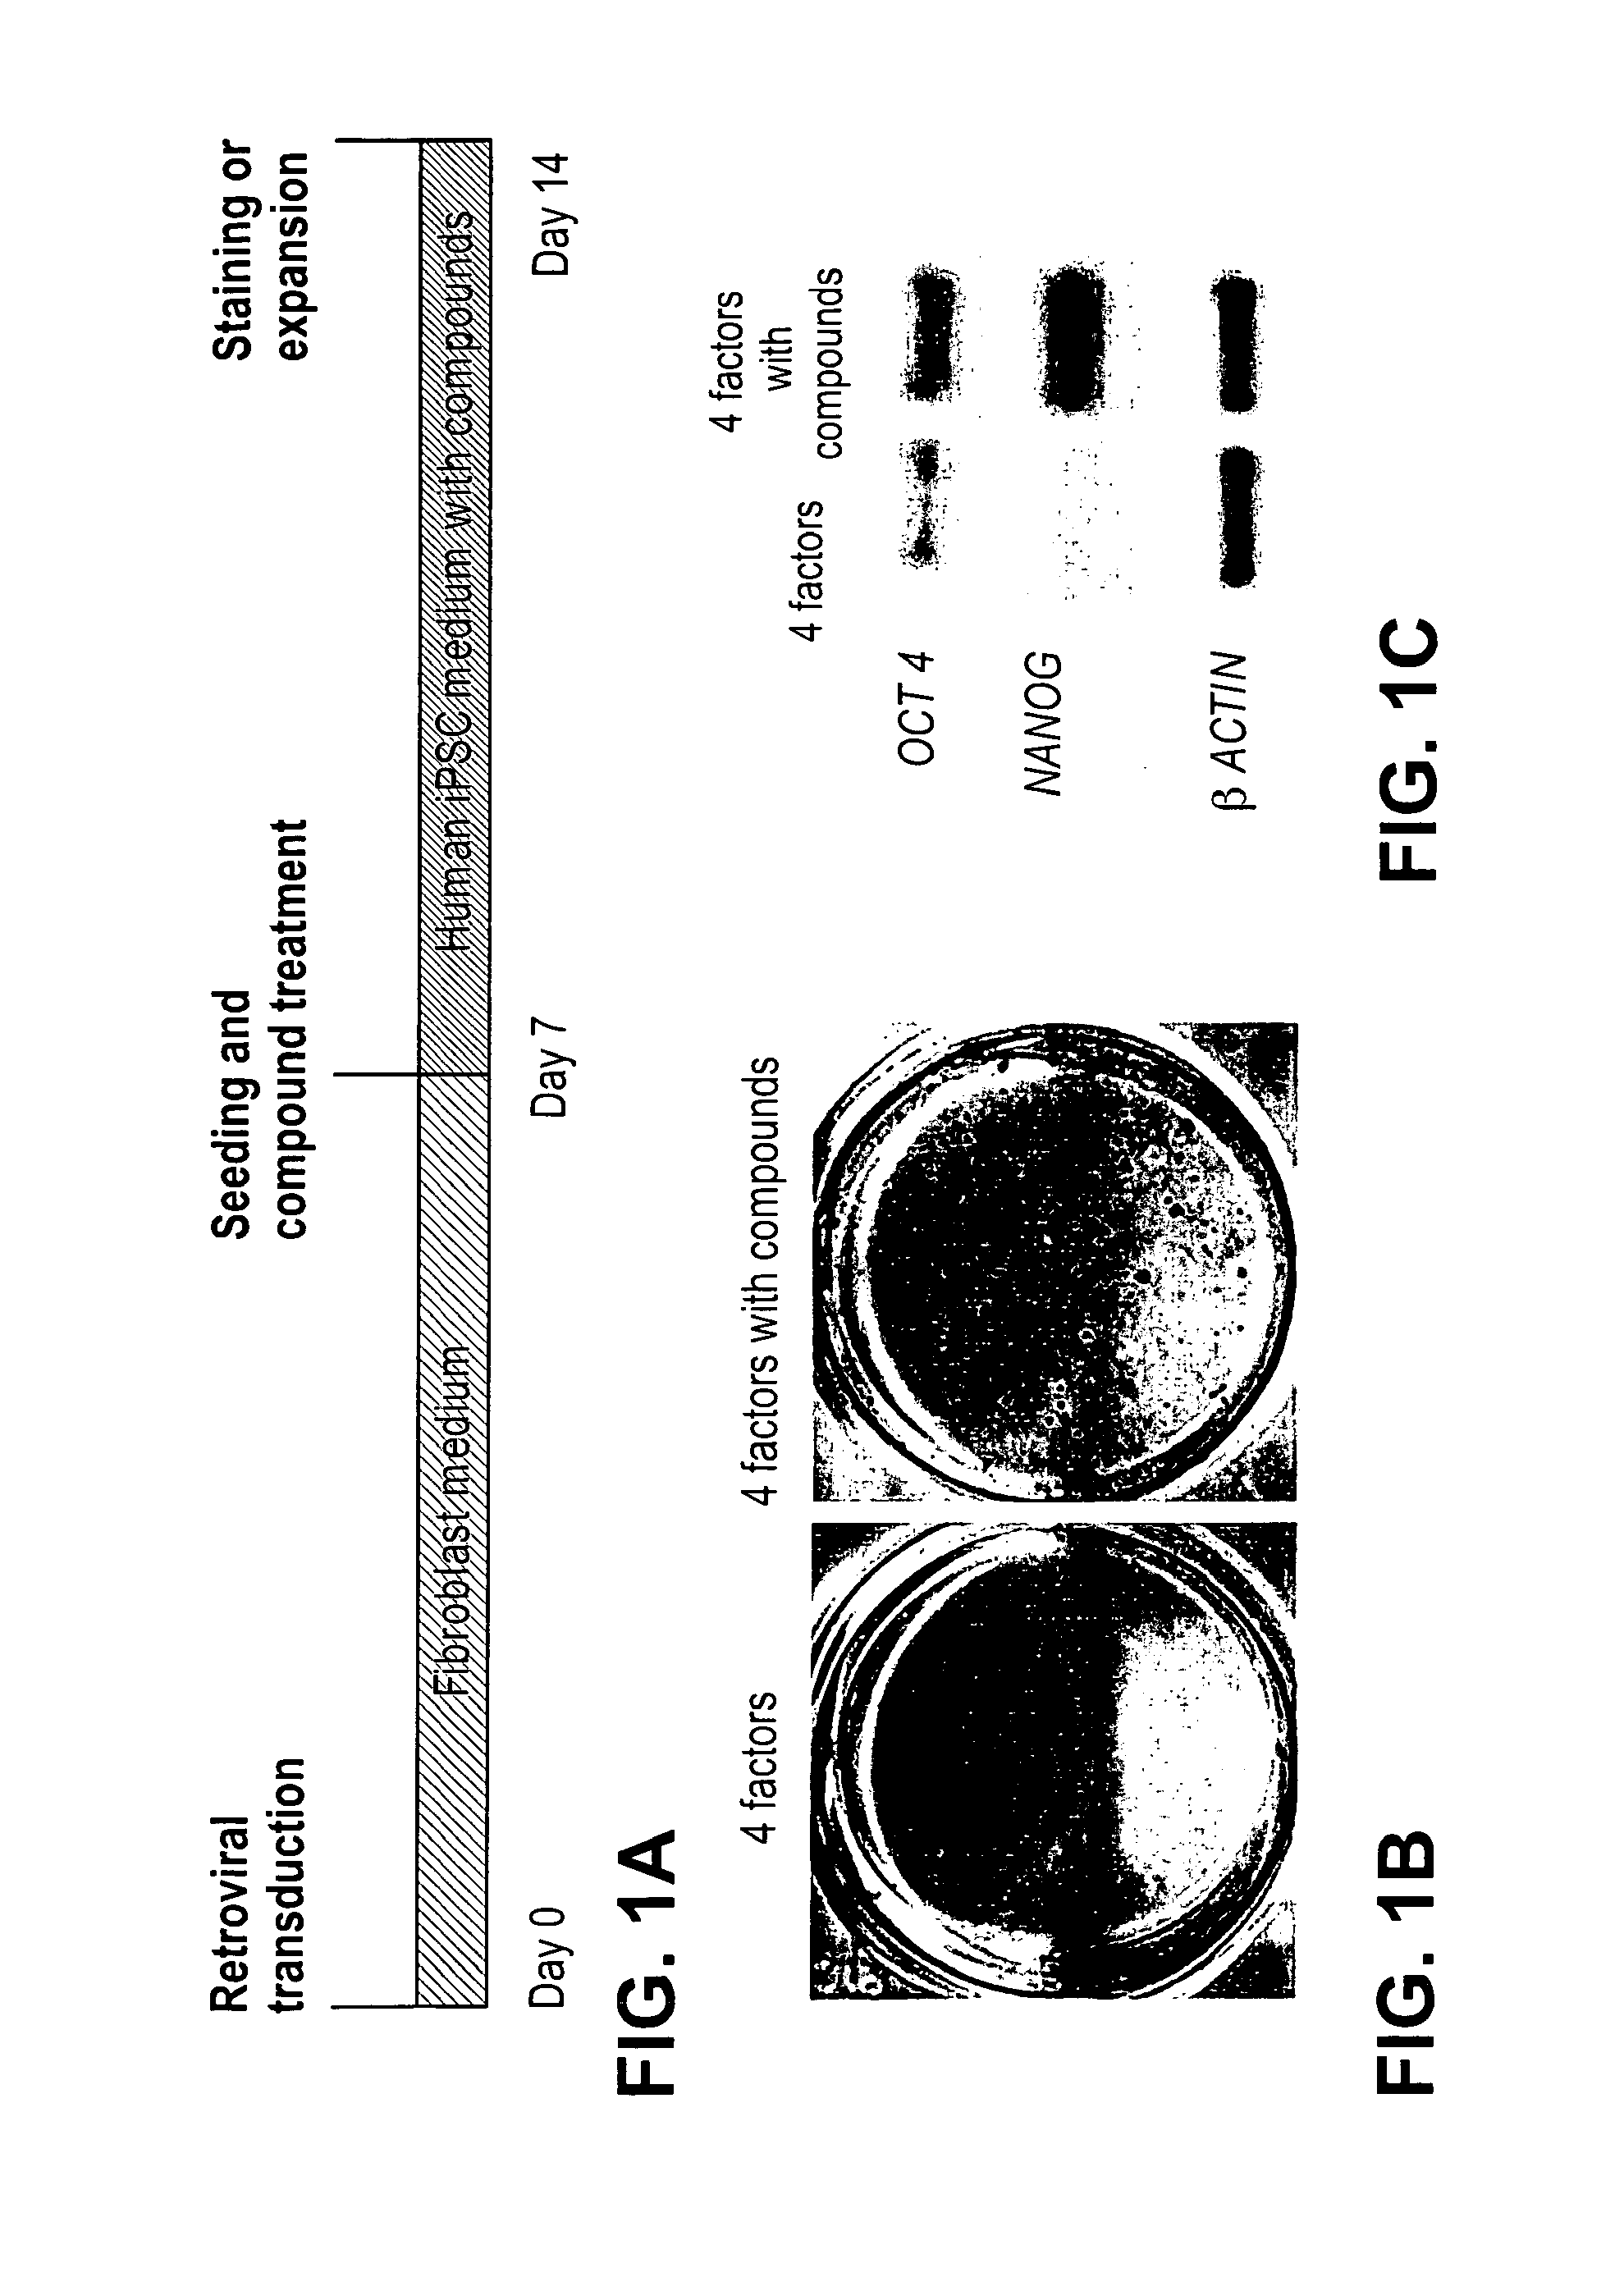 Induction of pluripotent cells